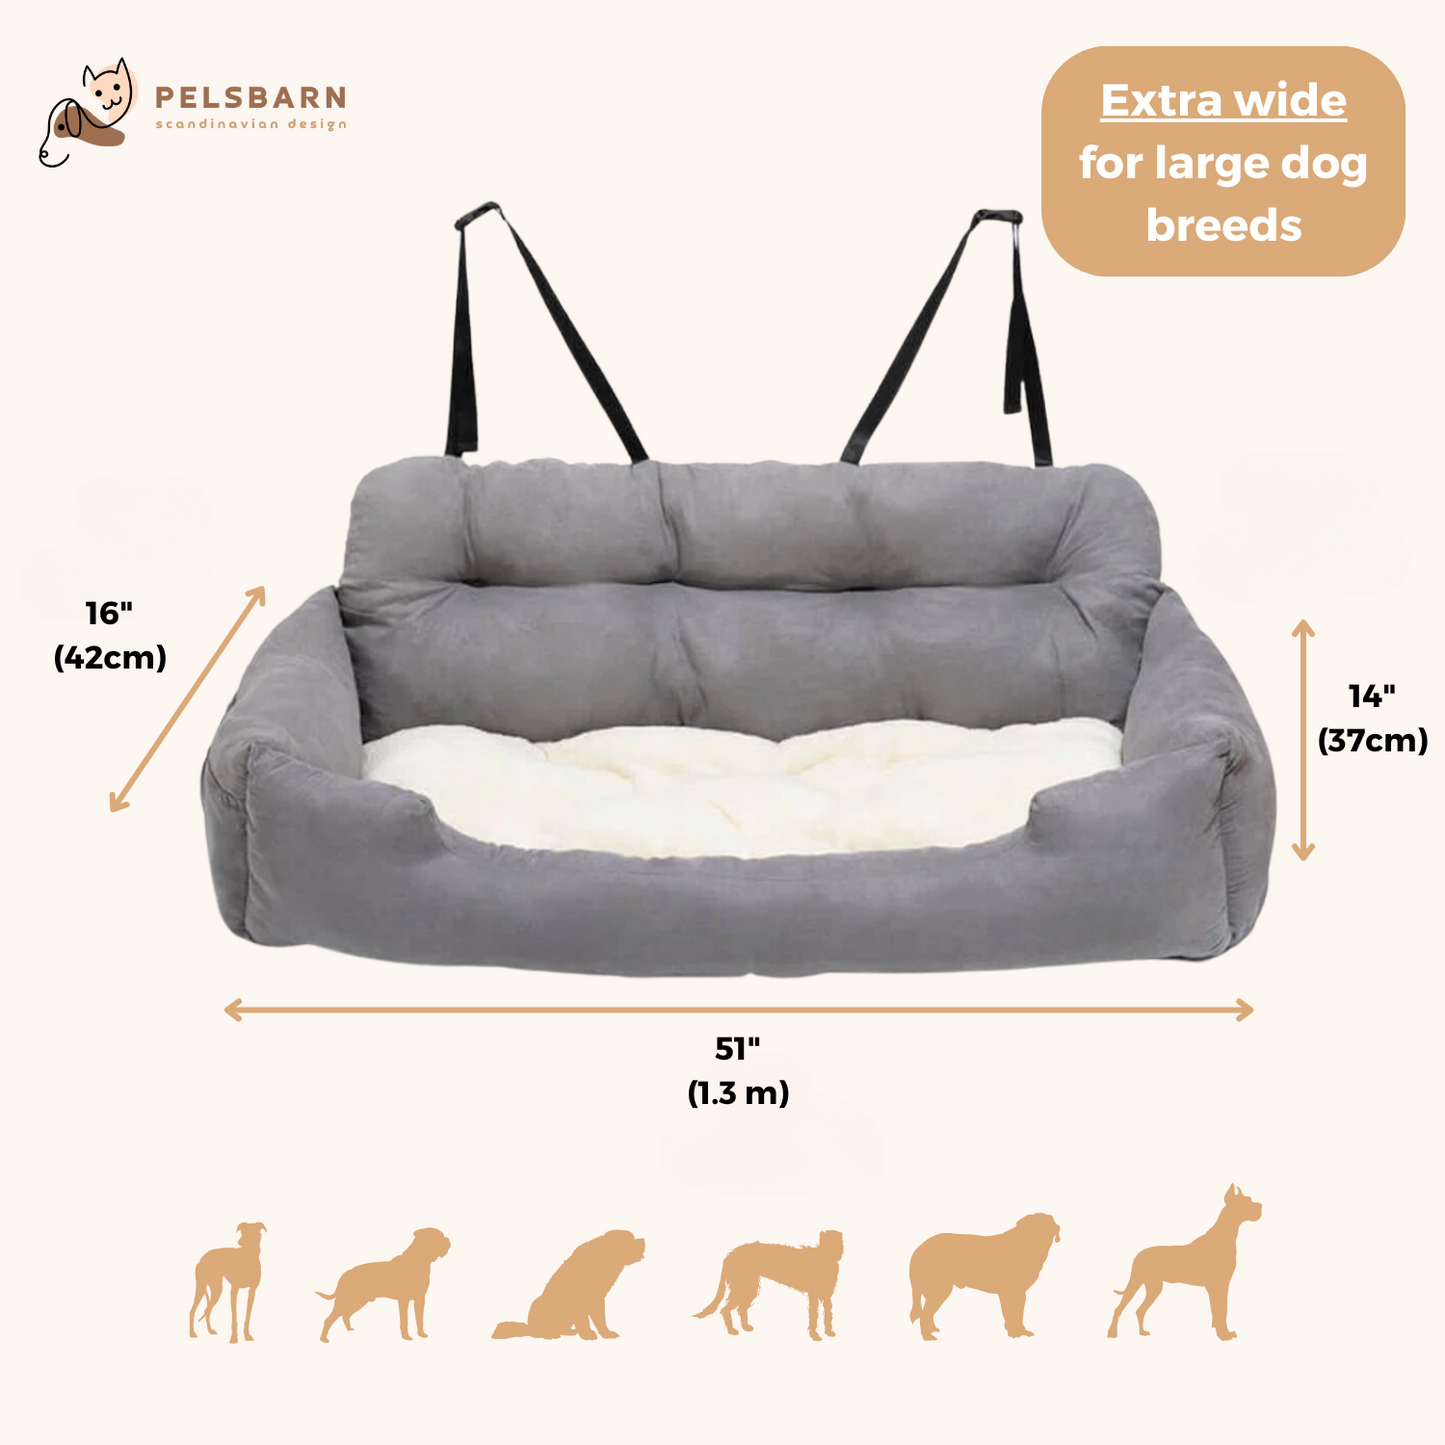 Pelsbarn XL Car Bed For All Dogs